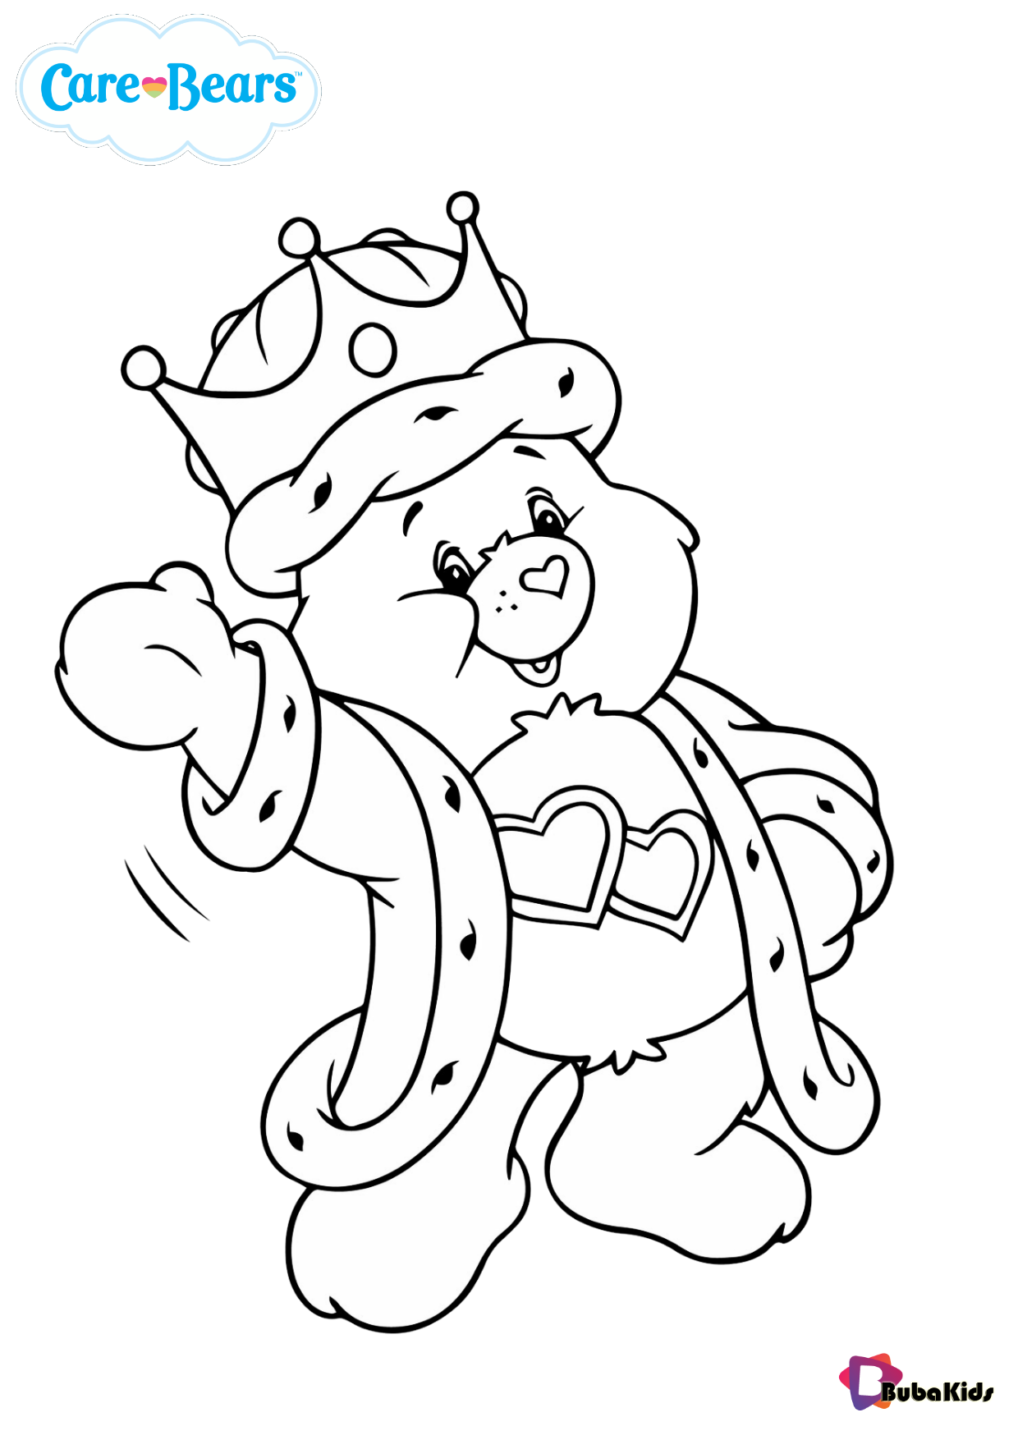 care bears Love a lot bear coloring pages